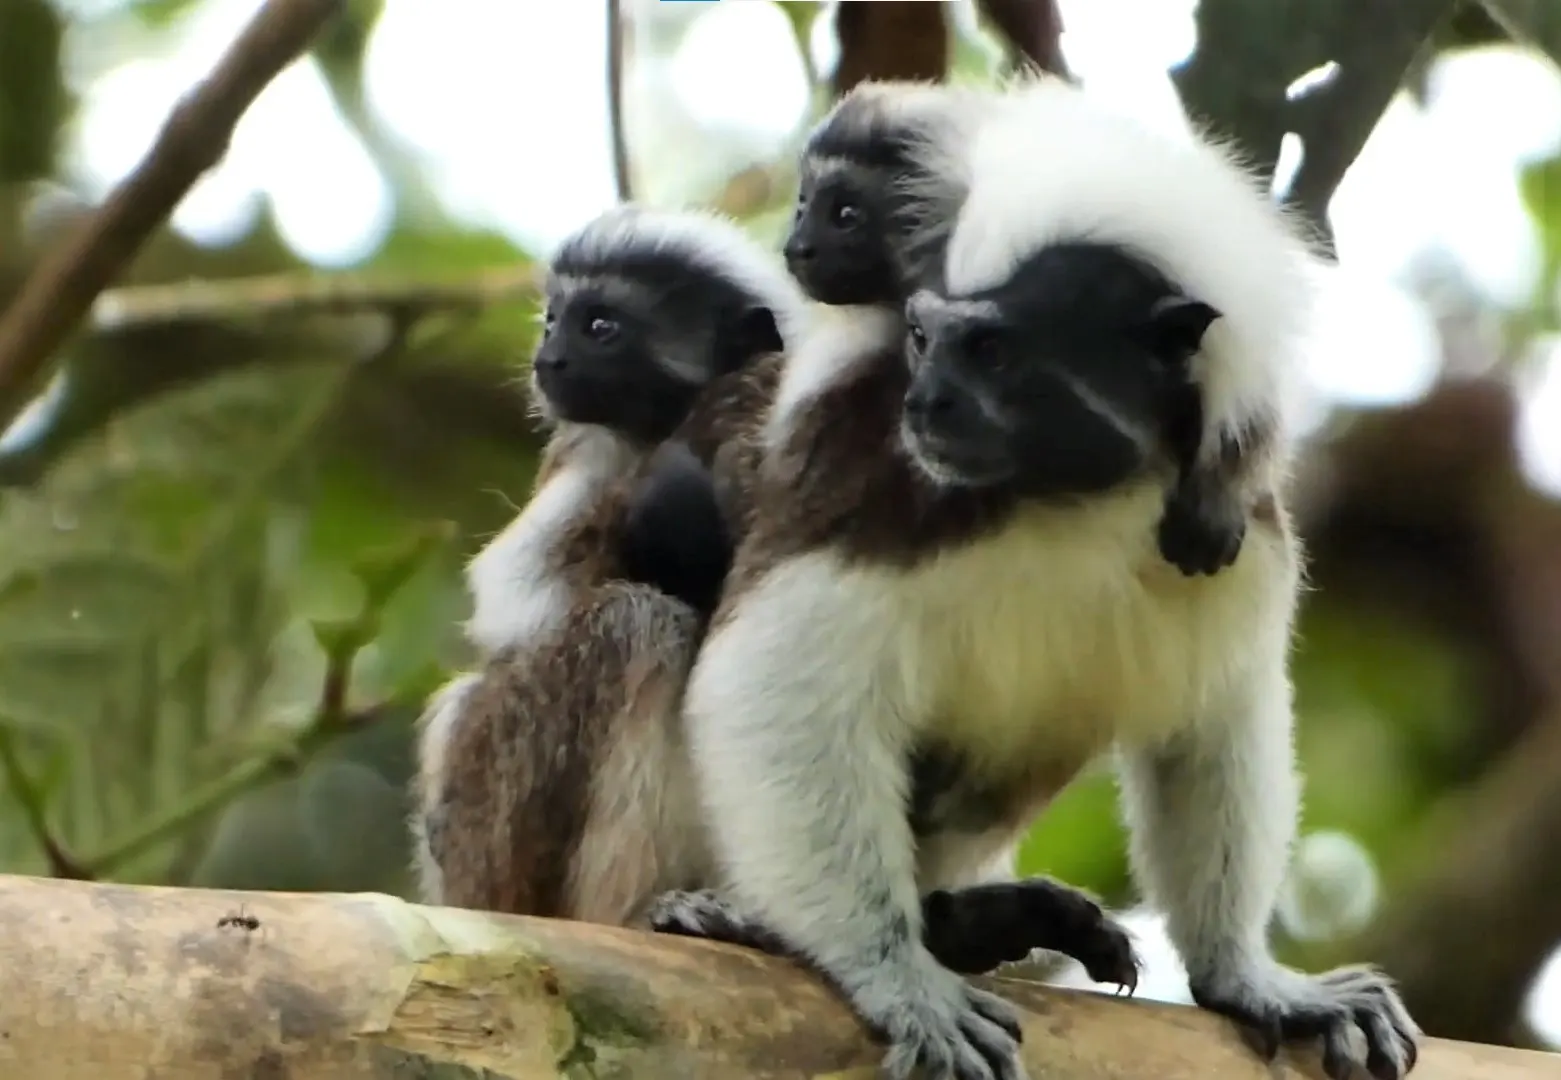 Grassroots Community Organizing Protects Colombia's Critically Endangered Cotton- Top Tamarin